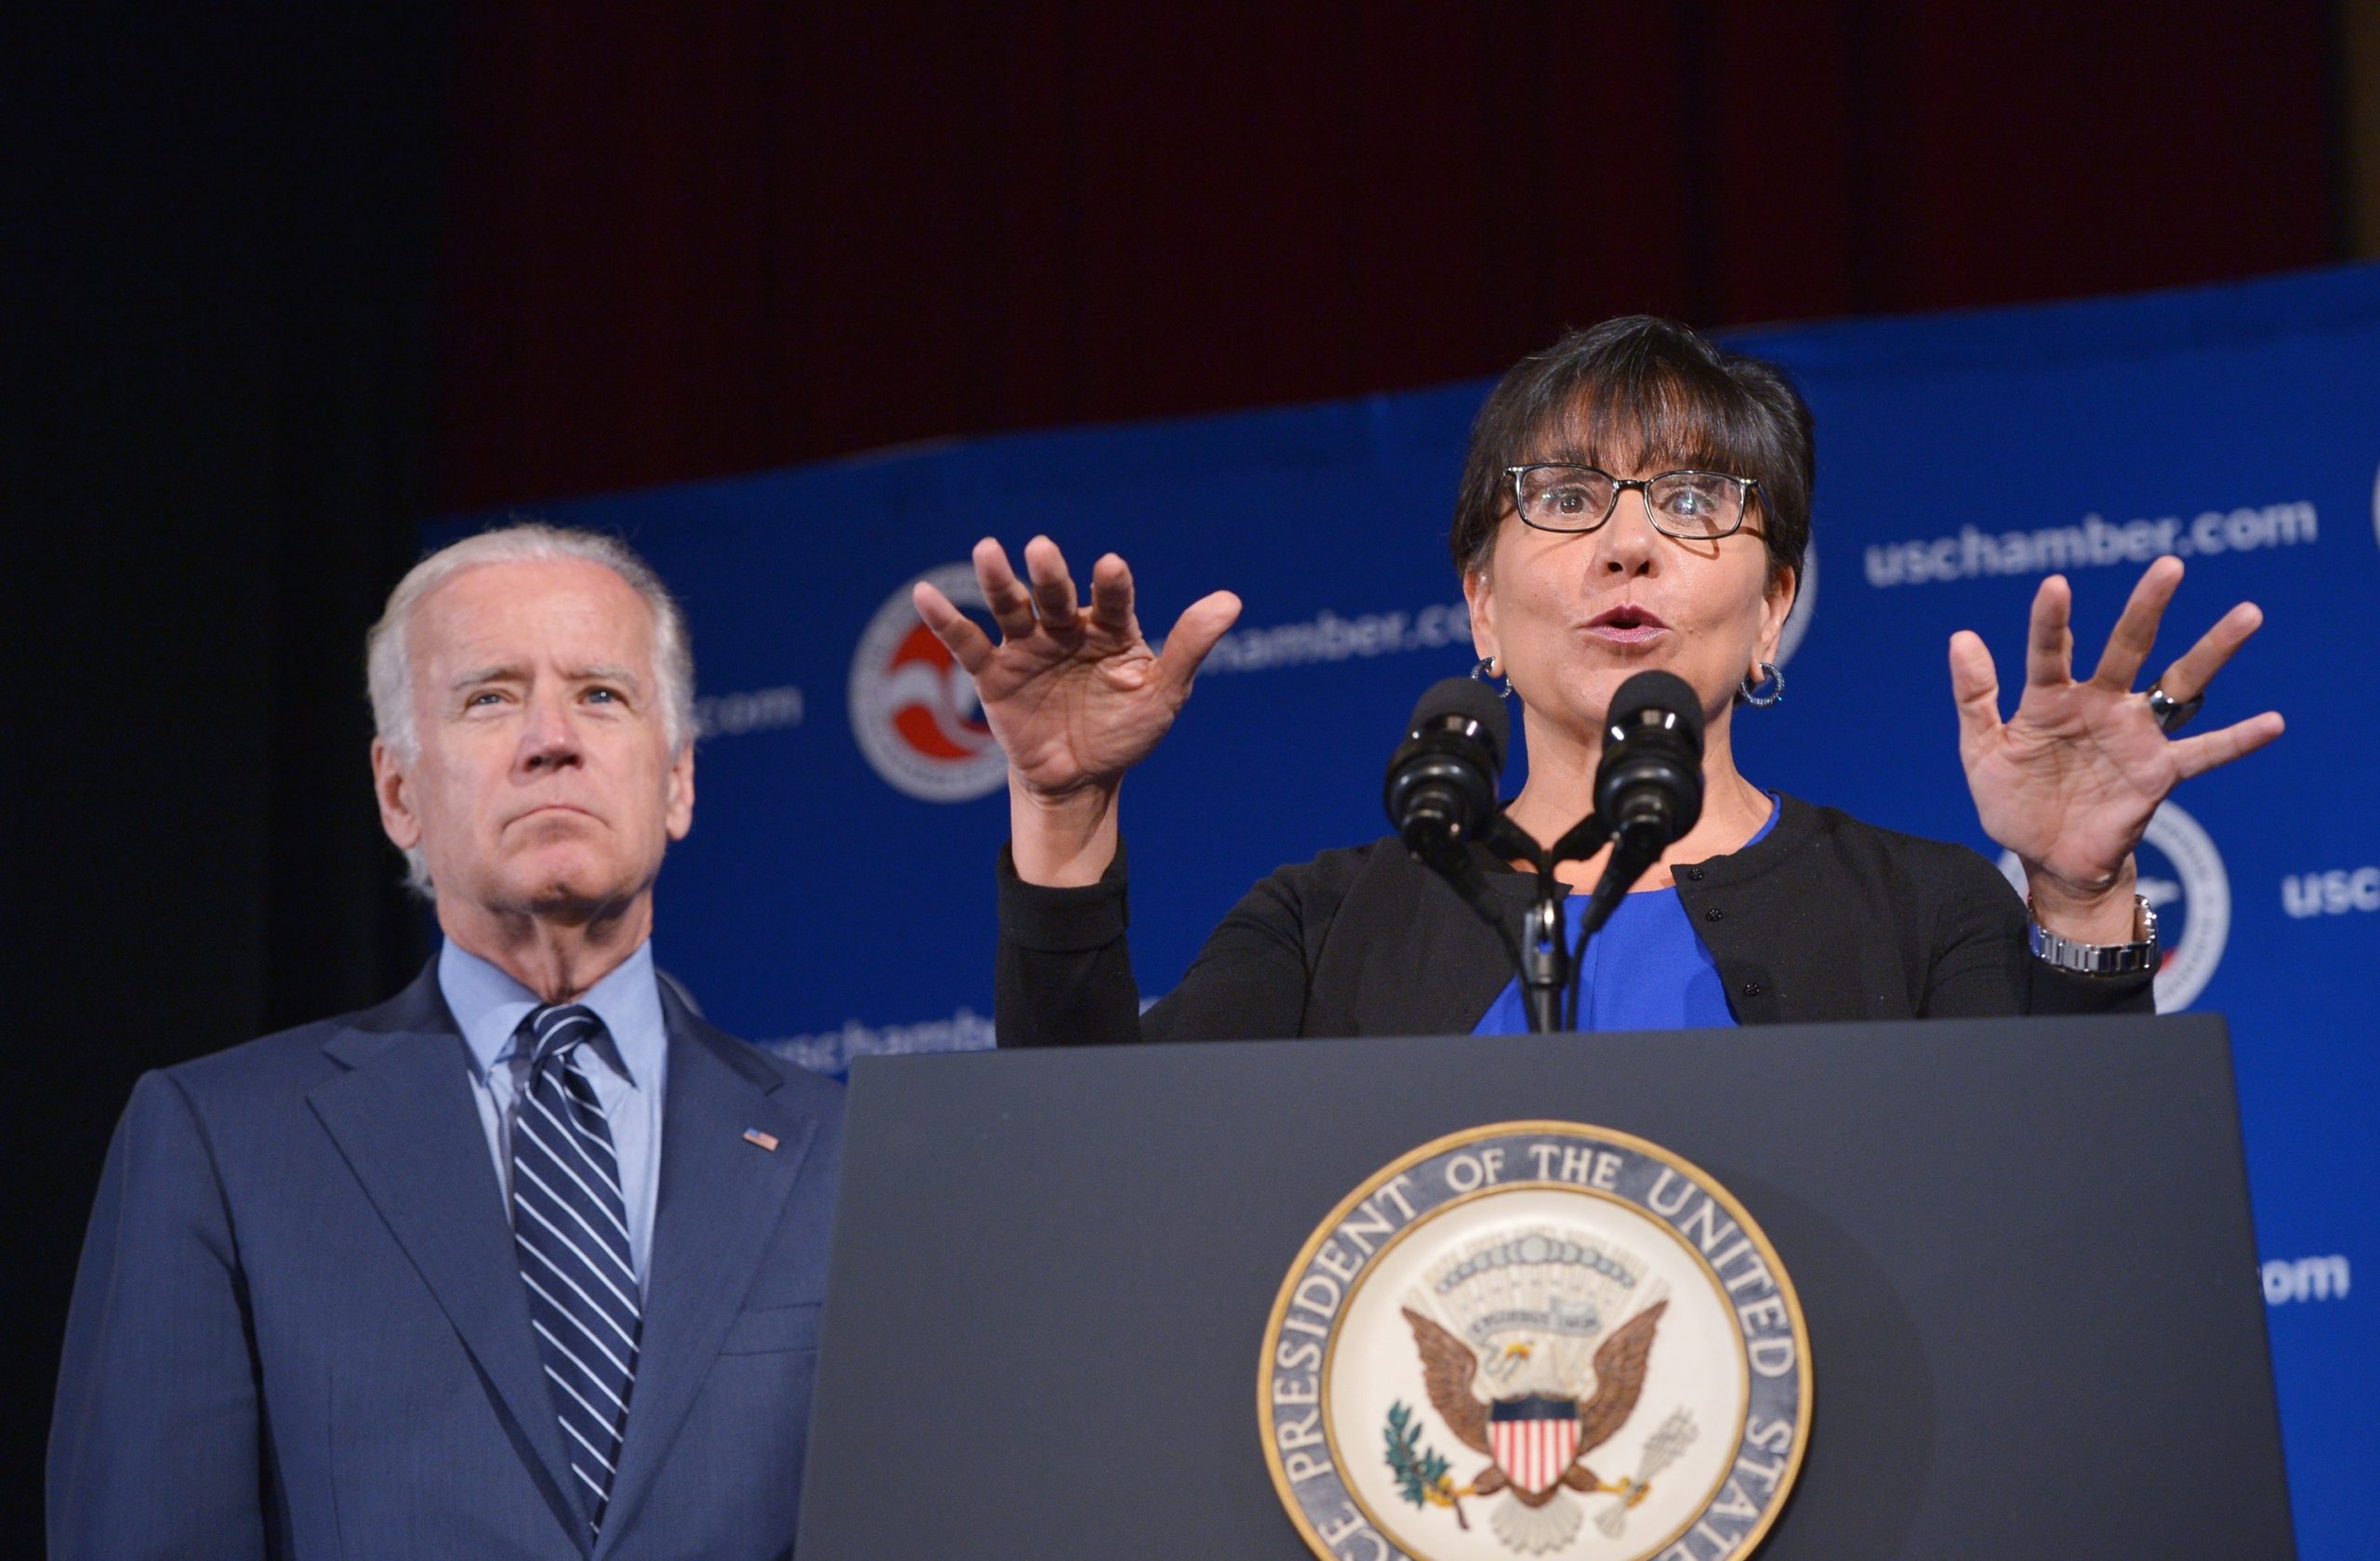 US Commerce Secretary Penny Pritzker (R) introduces US Vice President Joe Biden before he addressed the US-Ukraine Business forum at the US Chamber of Commerce on July 13, 2015 in Washington, DC. AFP PHOTO/MANDEL NGAN (Photo credit should read MANDEL NGAN/AFP via Getty Images)